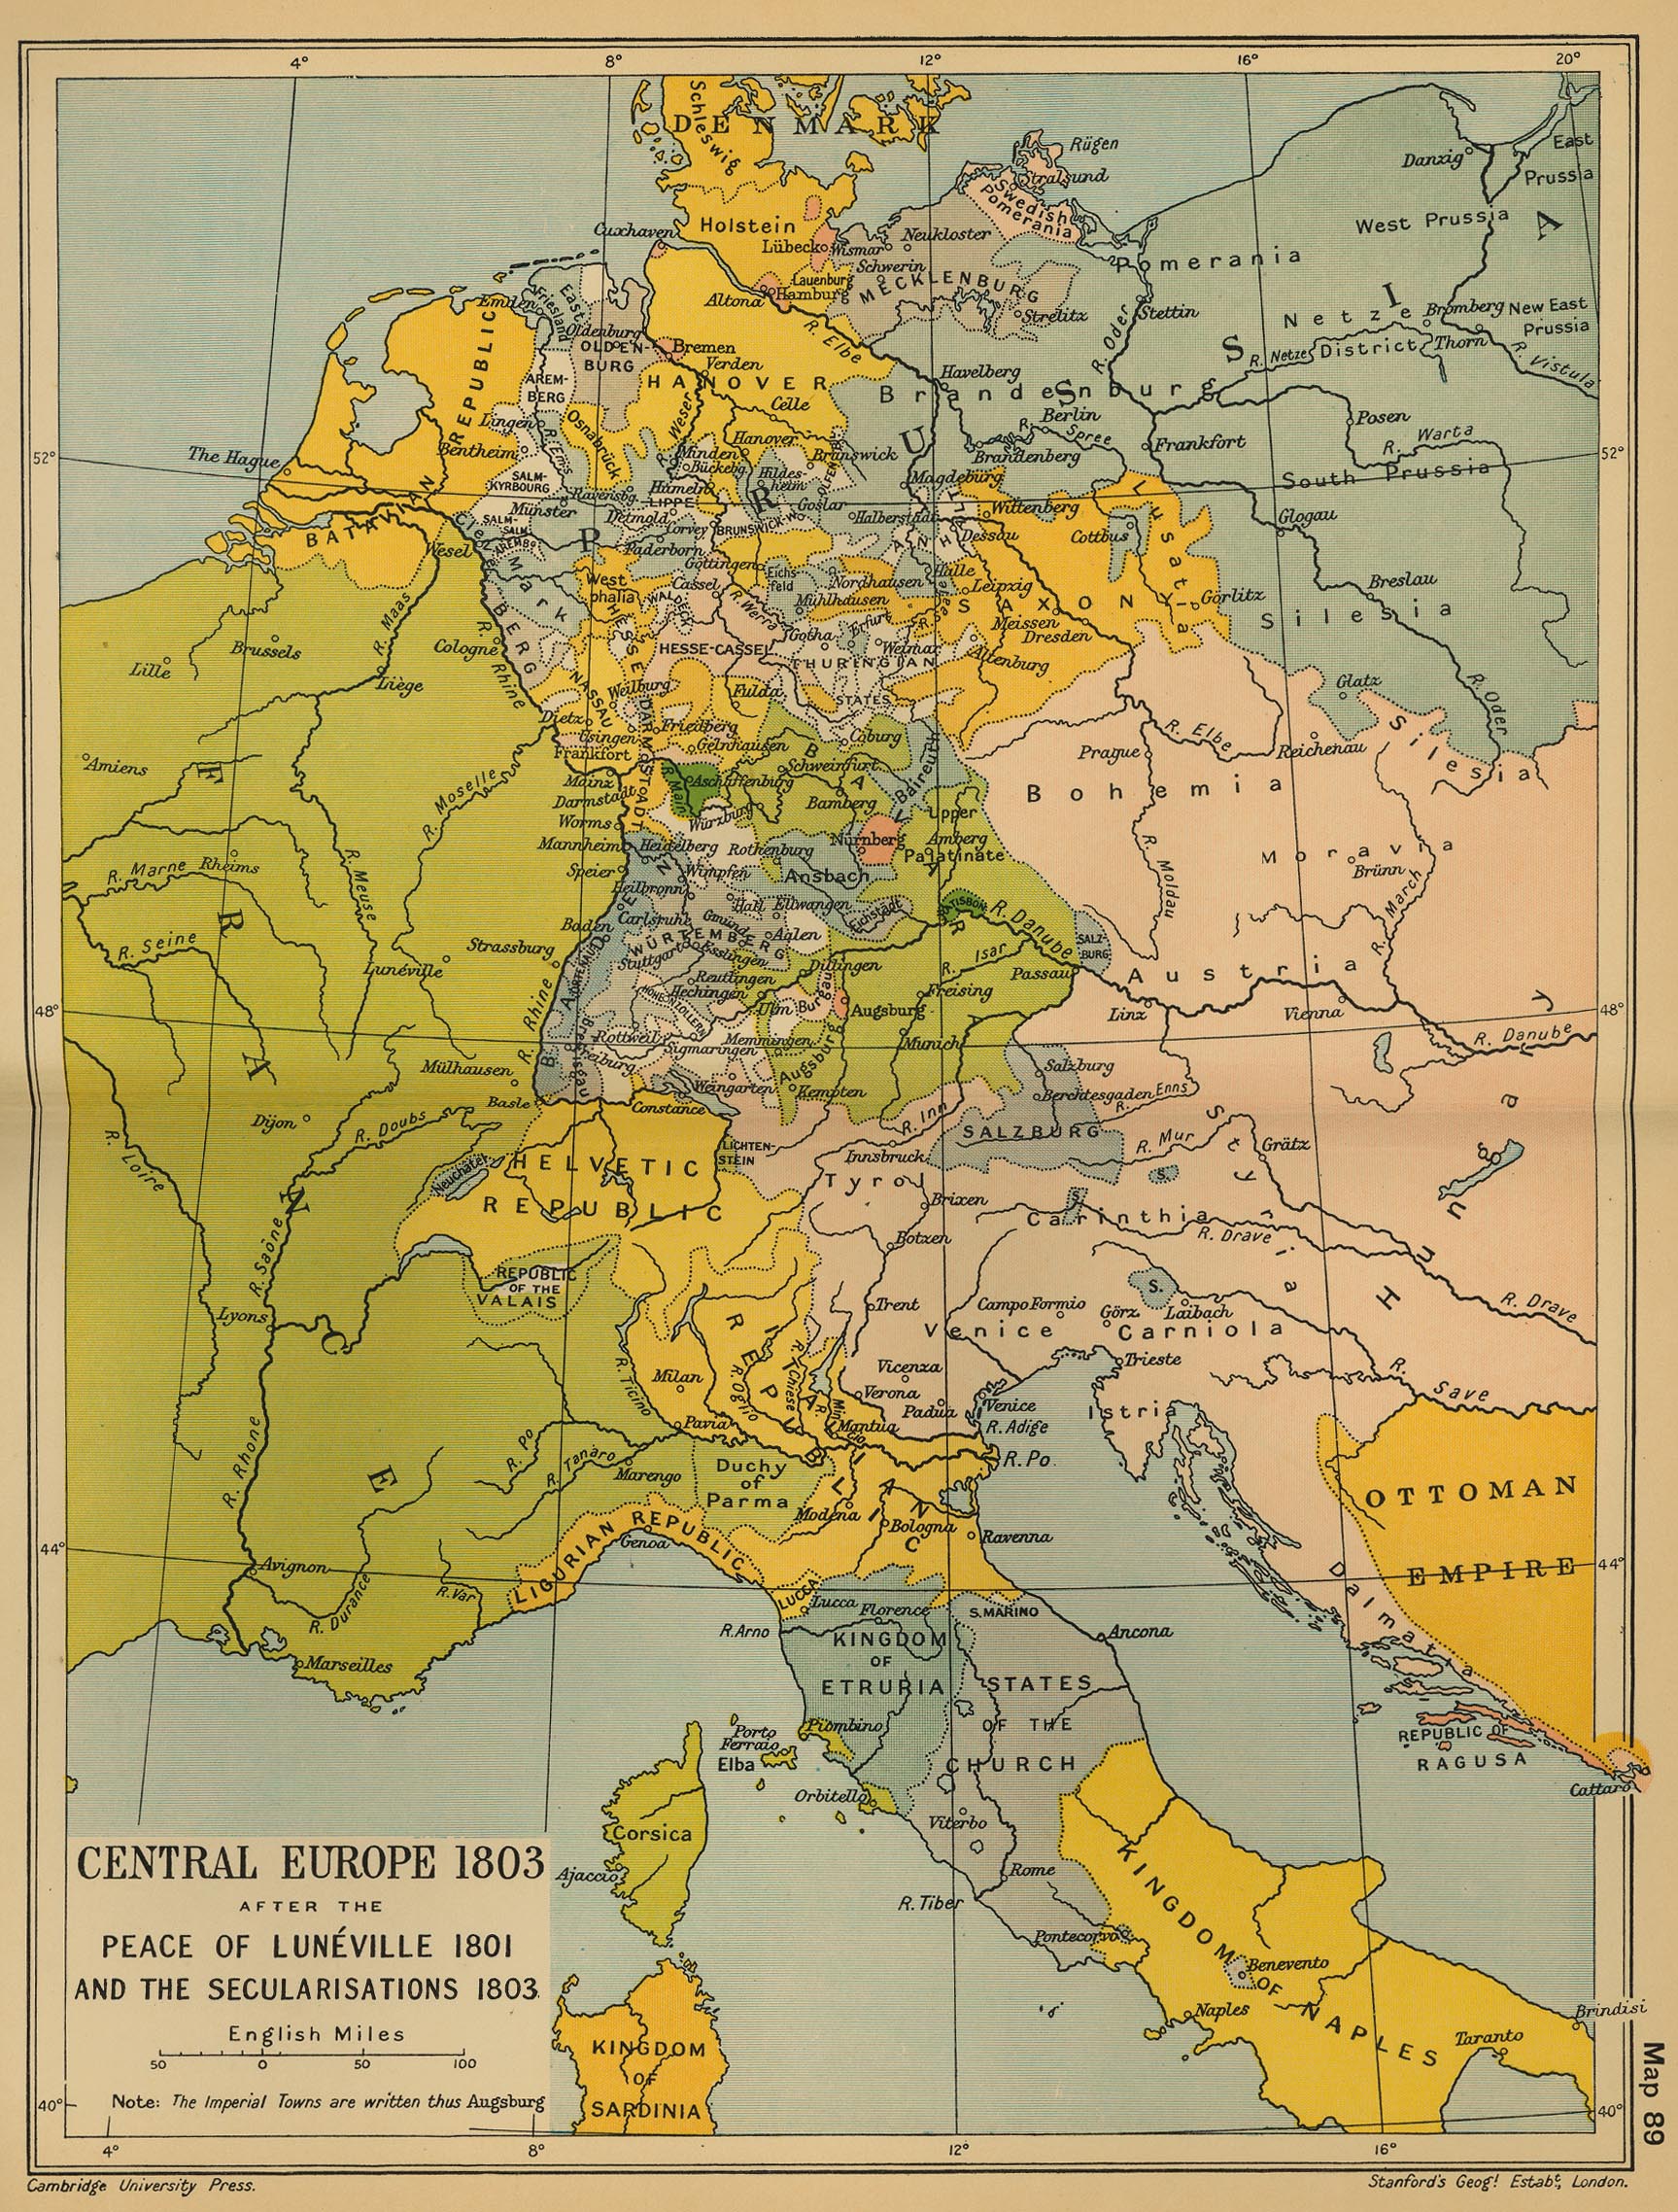 Map of Central Europe in 1803